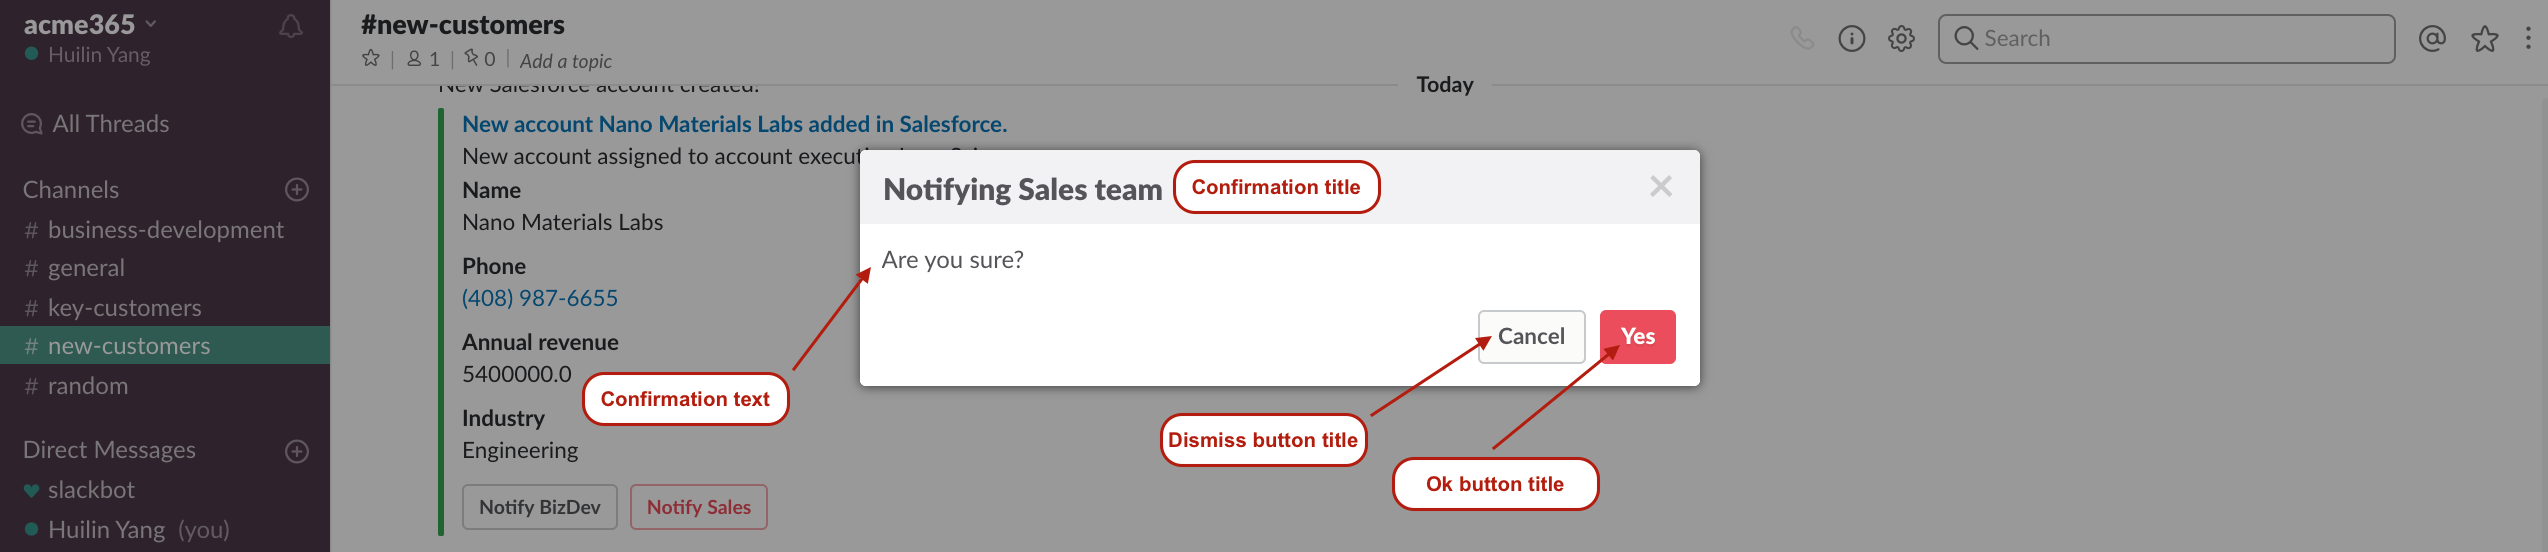 Popup prompt example